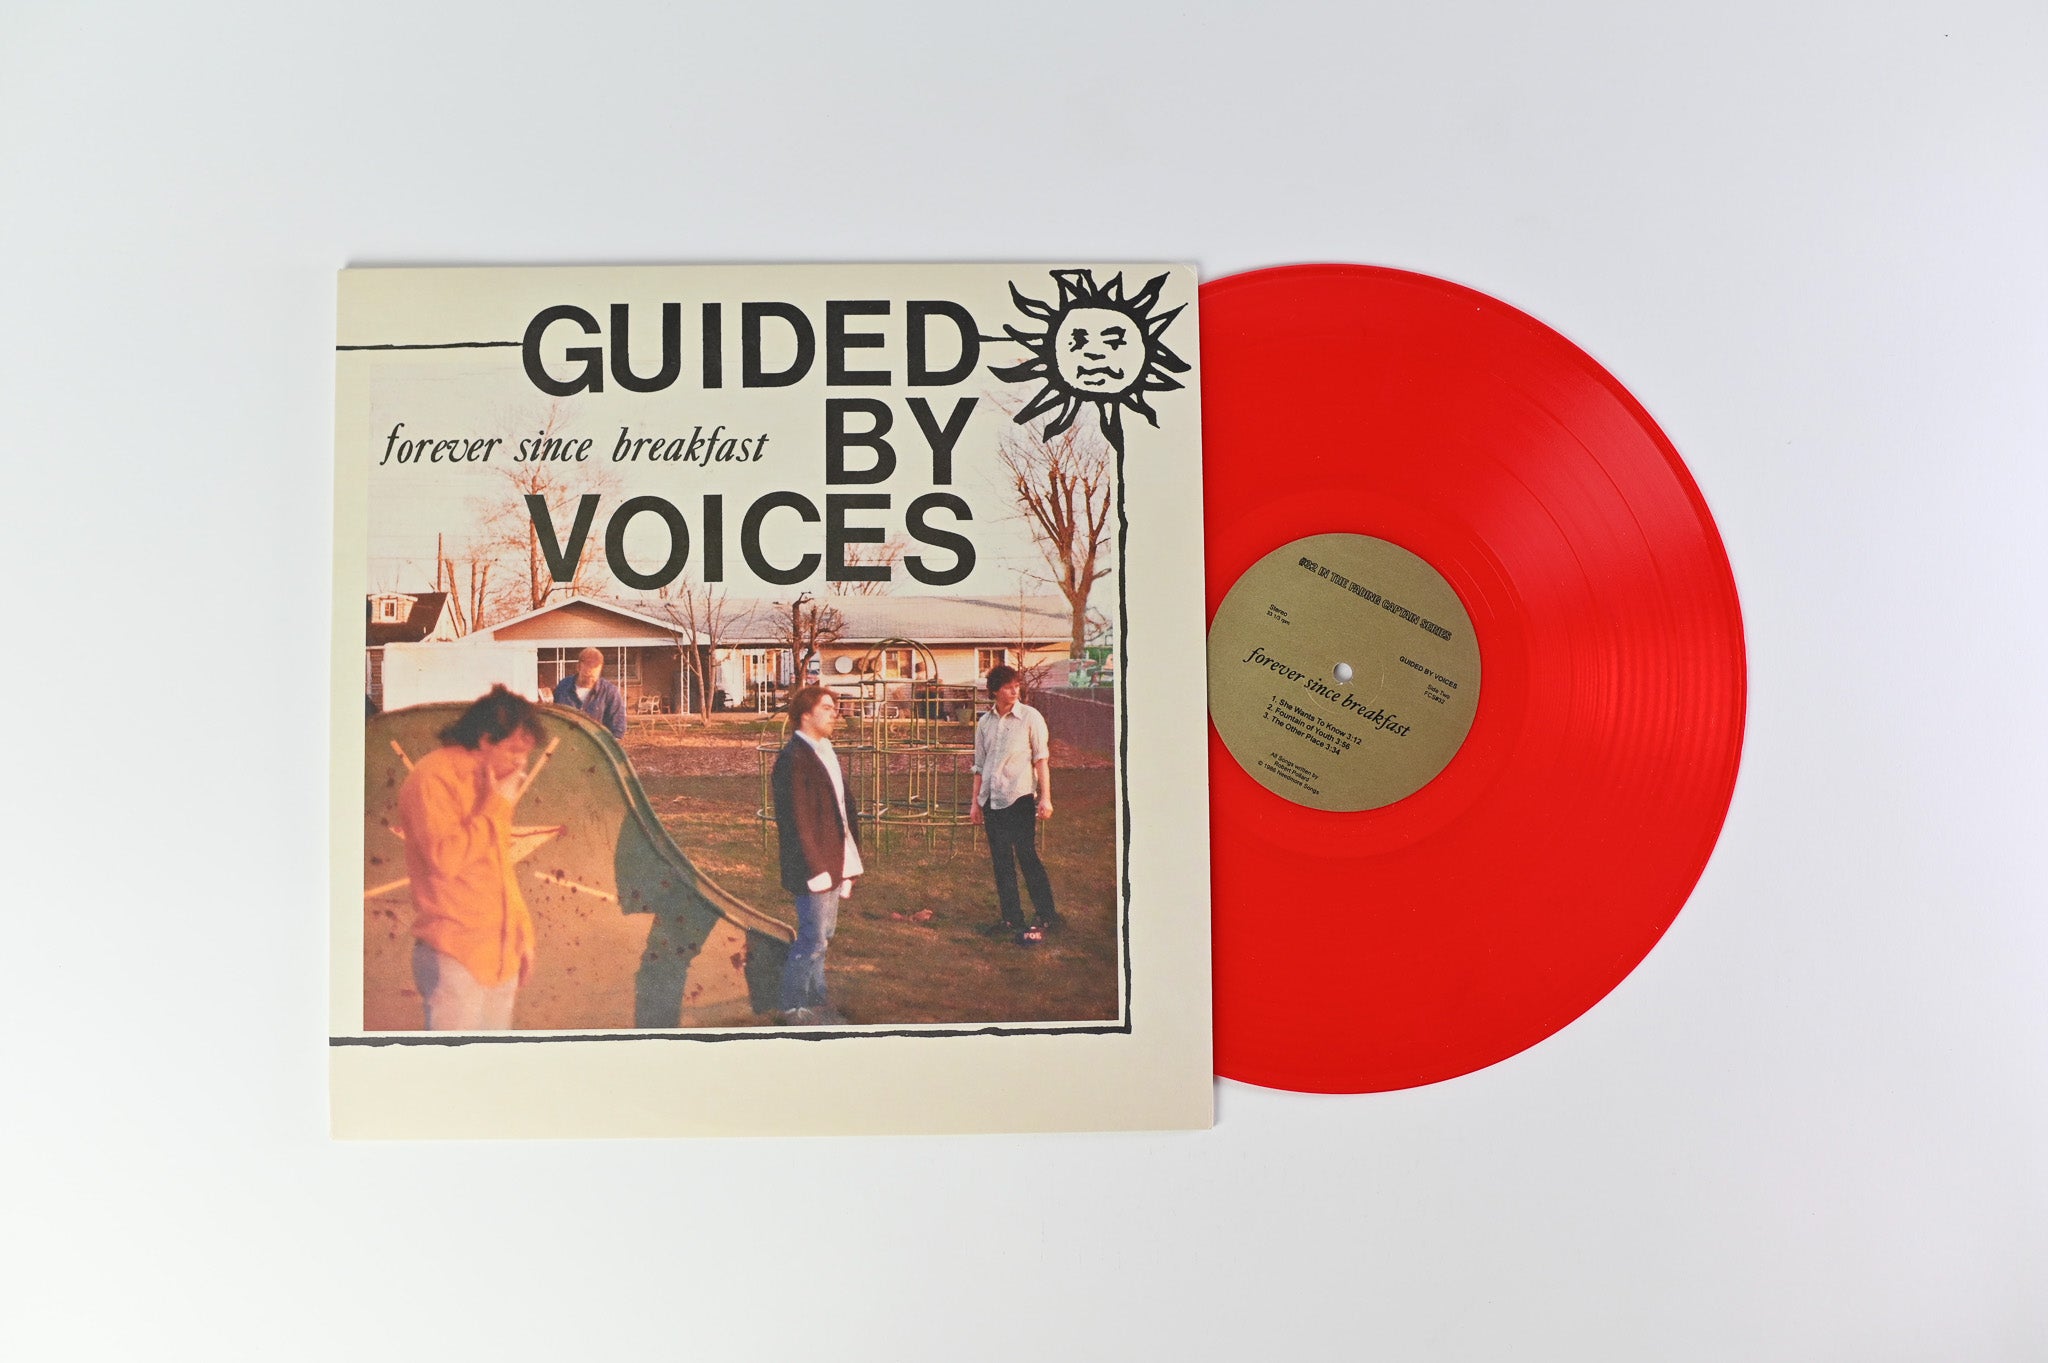 Guided By Voices - Forever Since Breakfast on Fading Captain Numbered Red Reissue